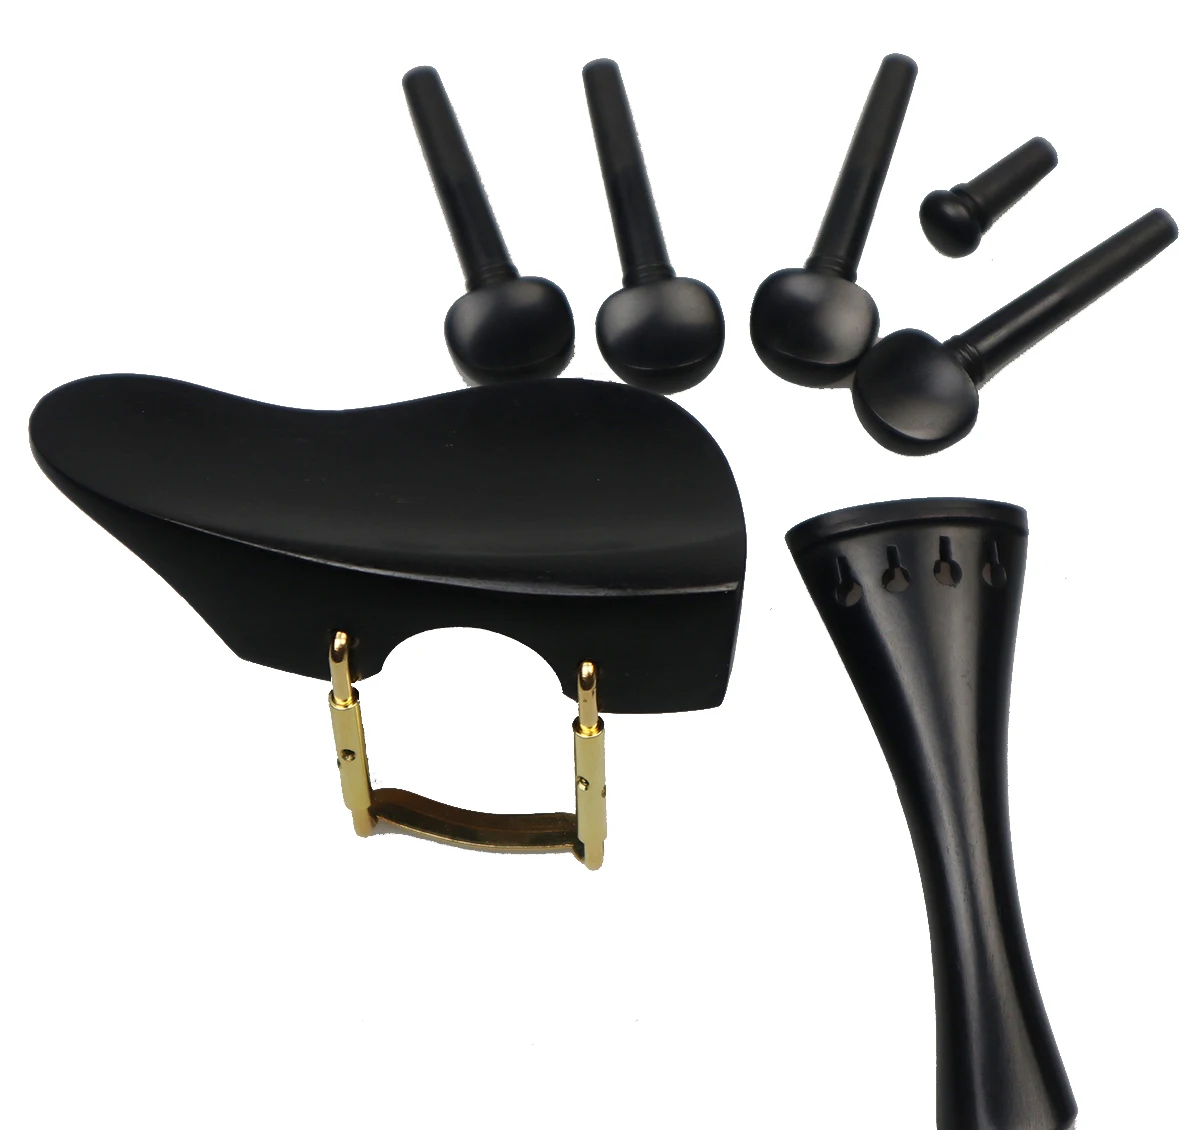 Baroque style Ebony Violin Pegs Chin rest Tailpiece Endpin,4/4 Size Violin Parts Accessories Fittings enlarge